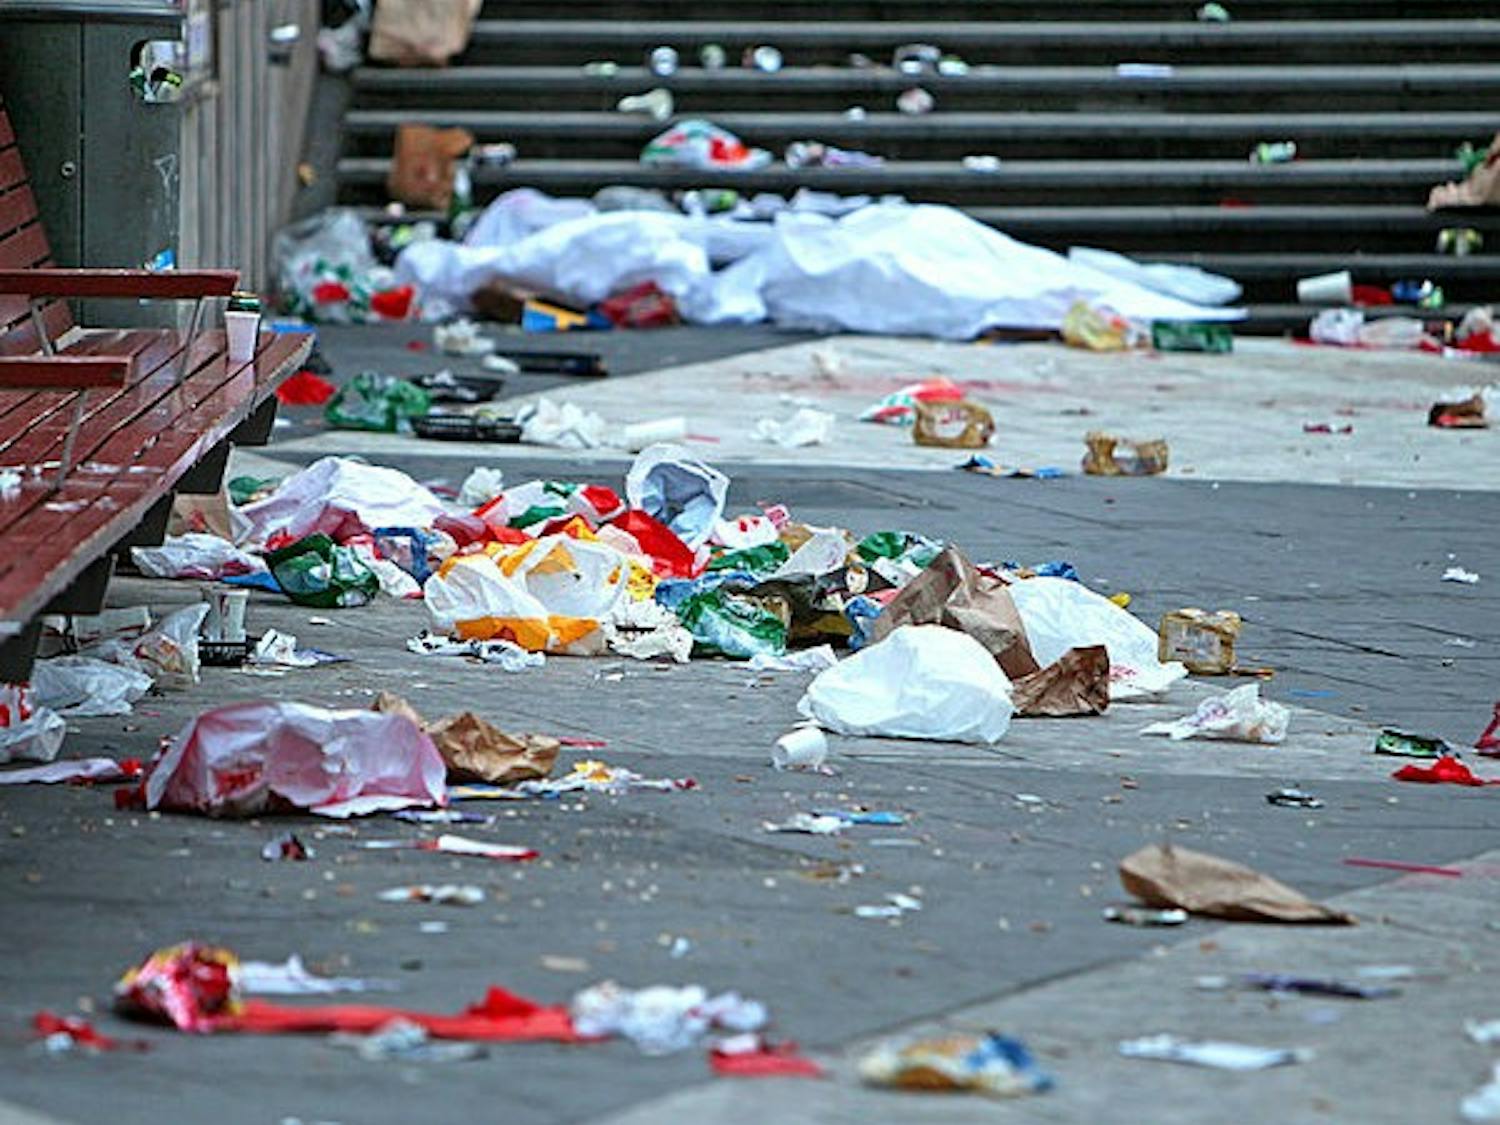 Trash litters the streets in the aftermath of big events like Freakfest.